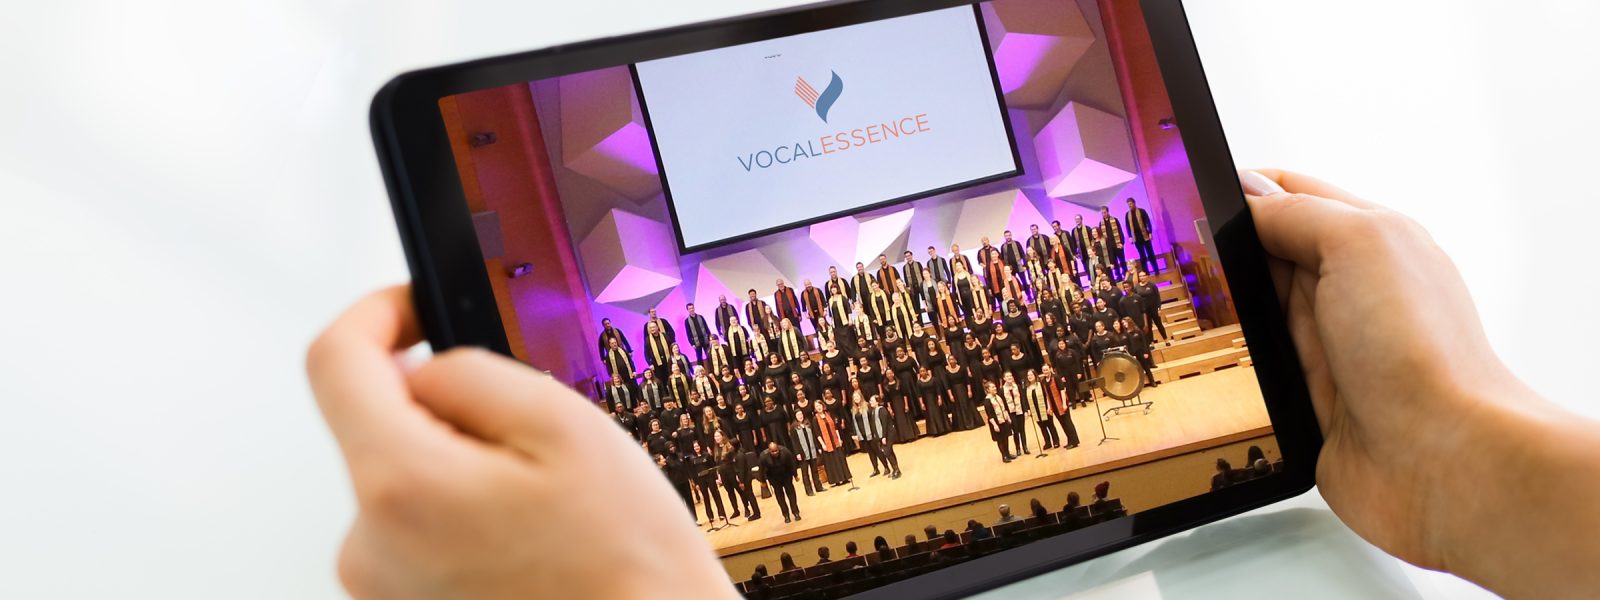 Hands holding tablet with image of many singers performing on stage